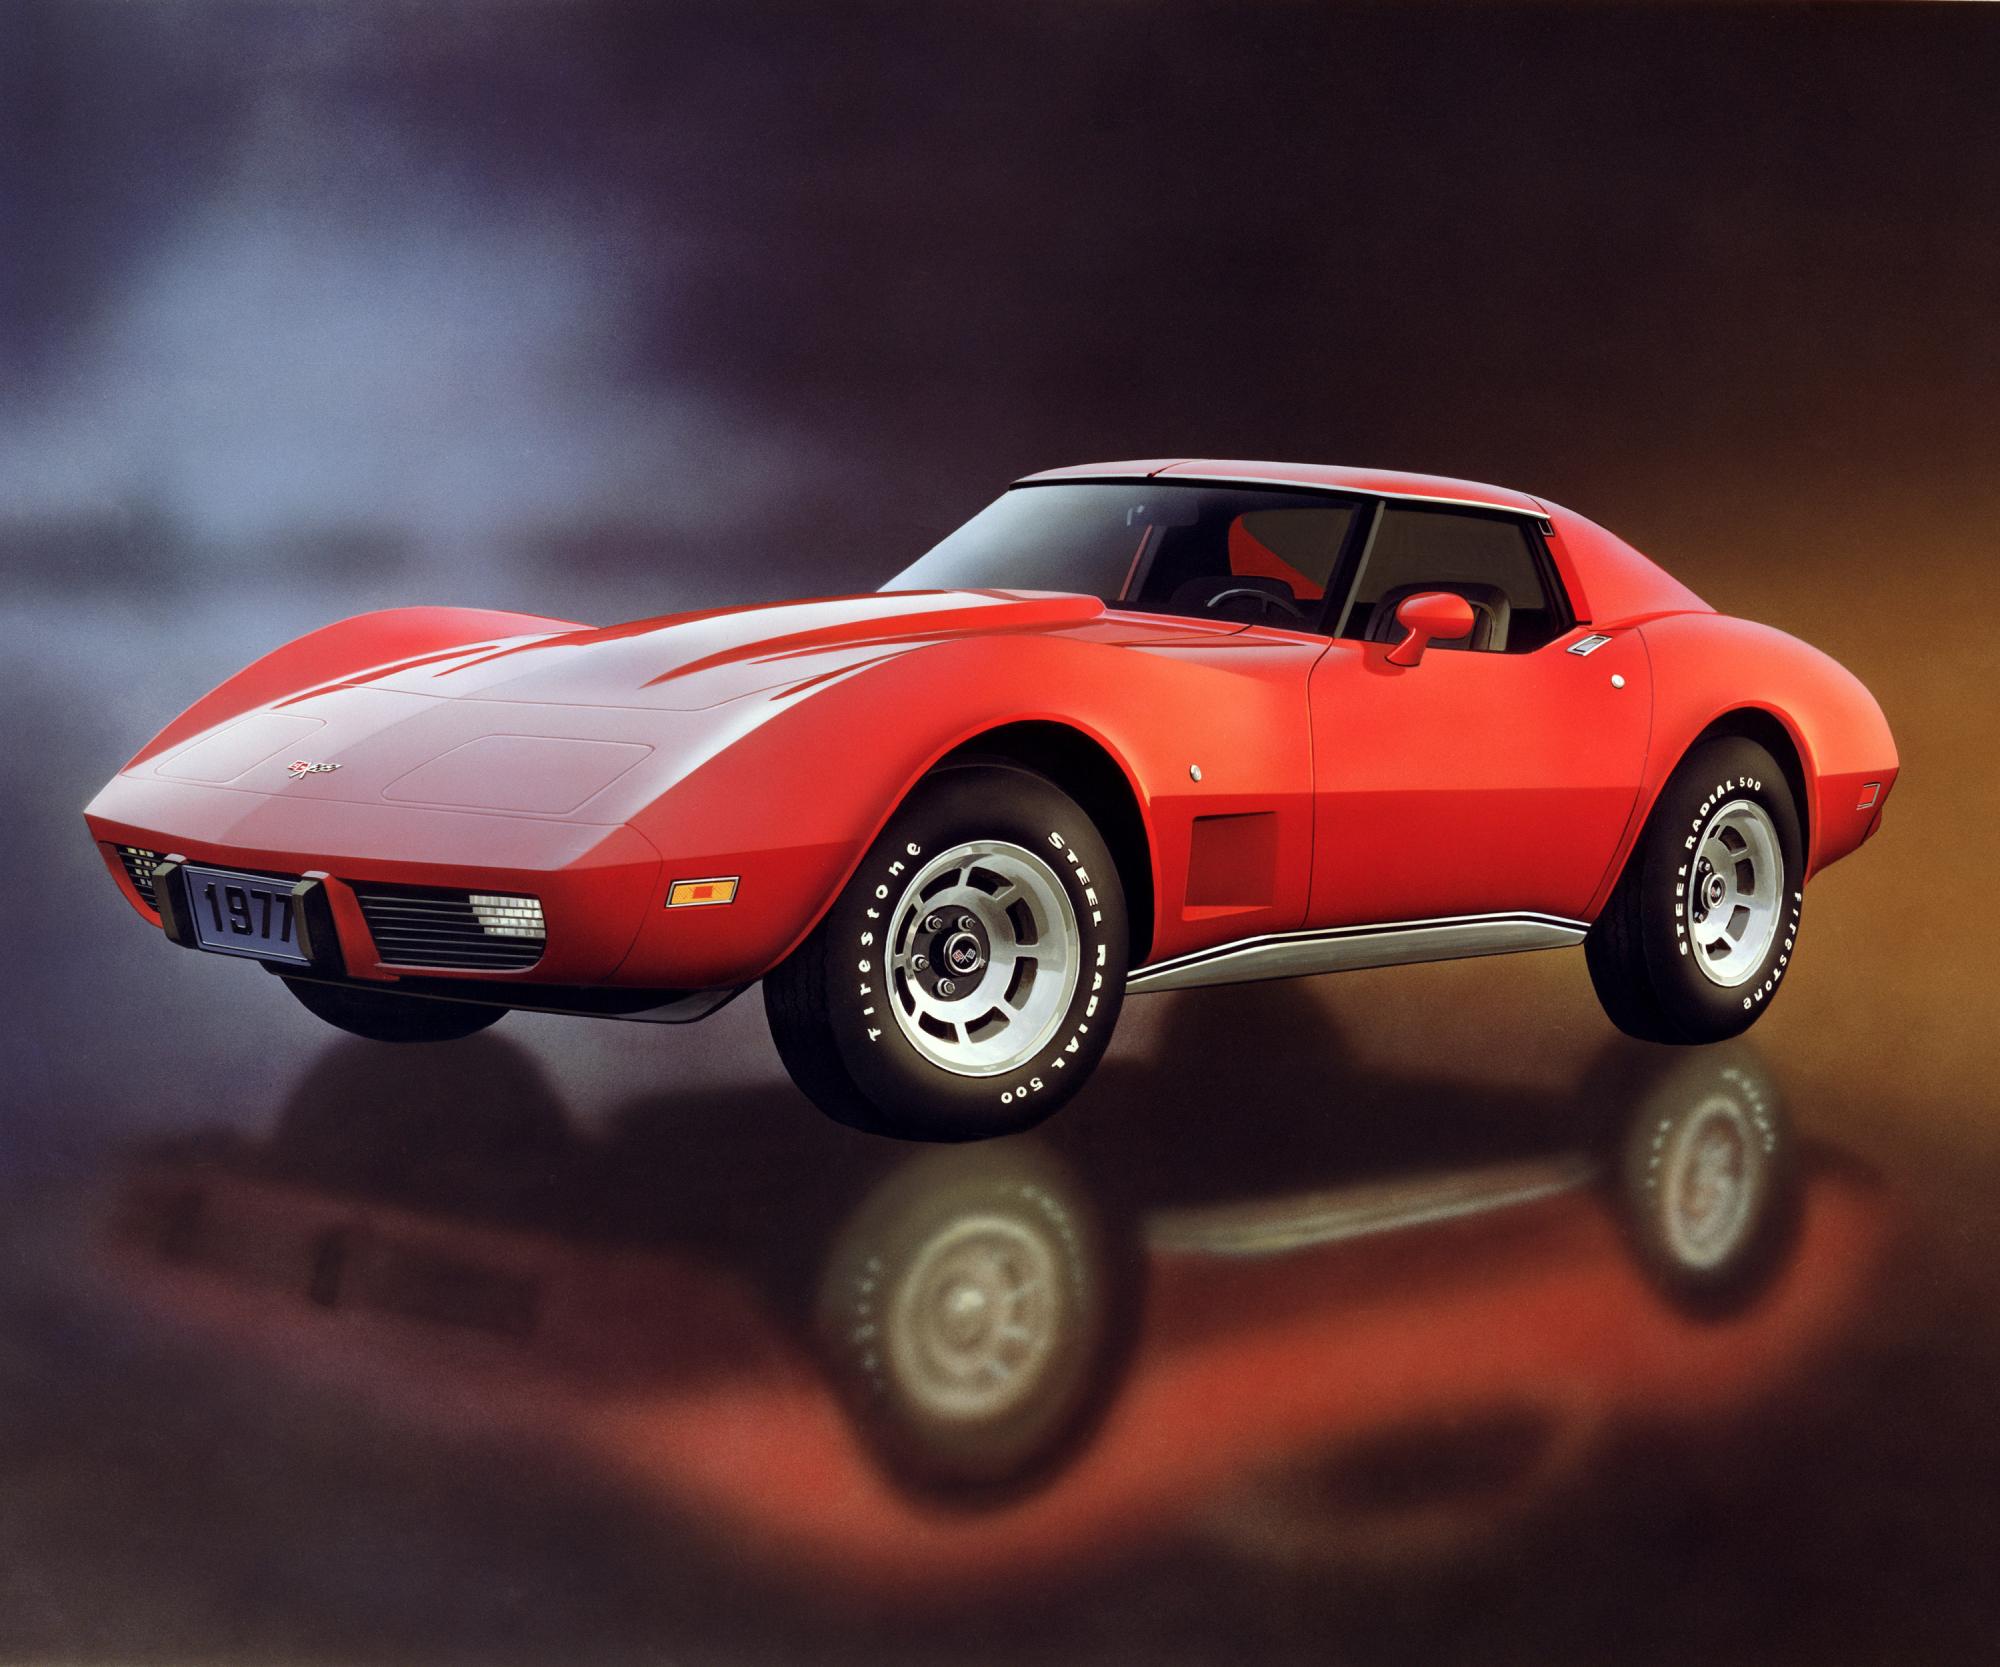 Featuring a T-top exclusive to third-generation models, the 1977 red Corvette is an American treasure.